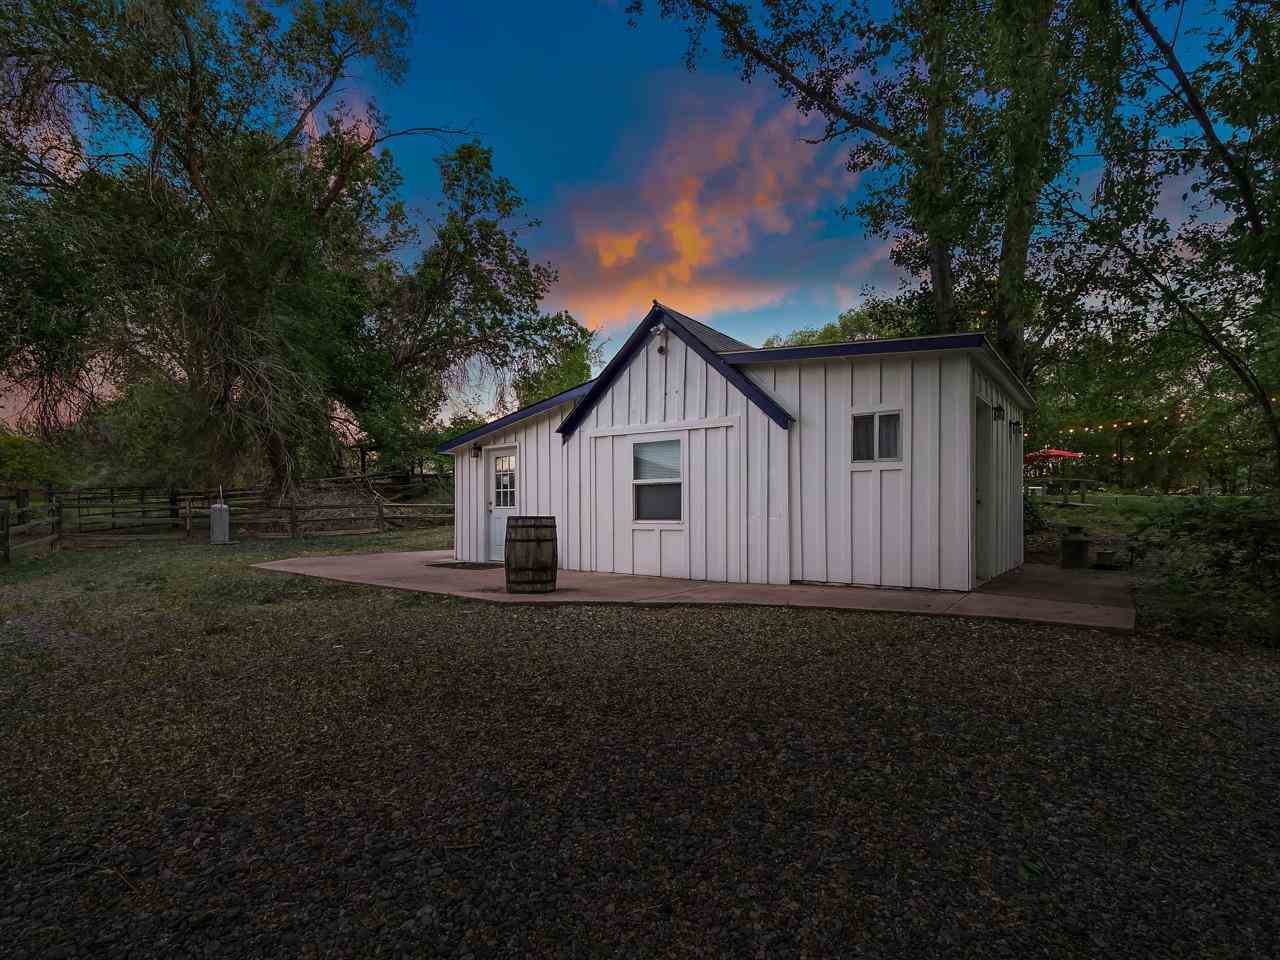 662 26 Road, Grand Junction, CO